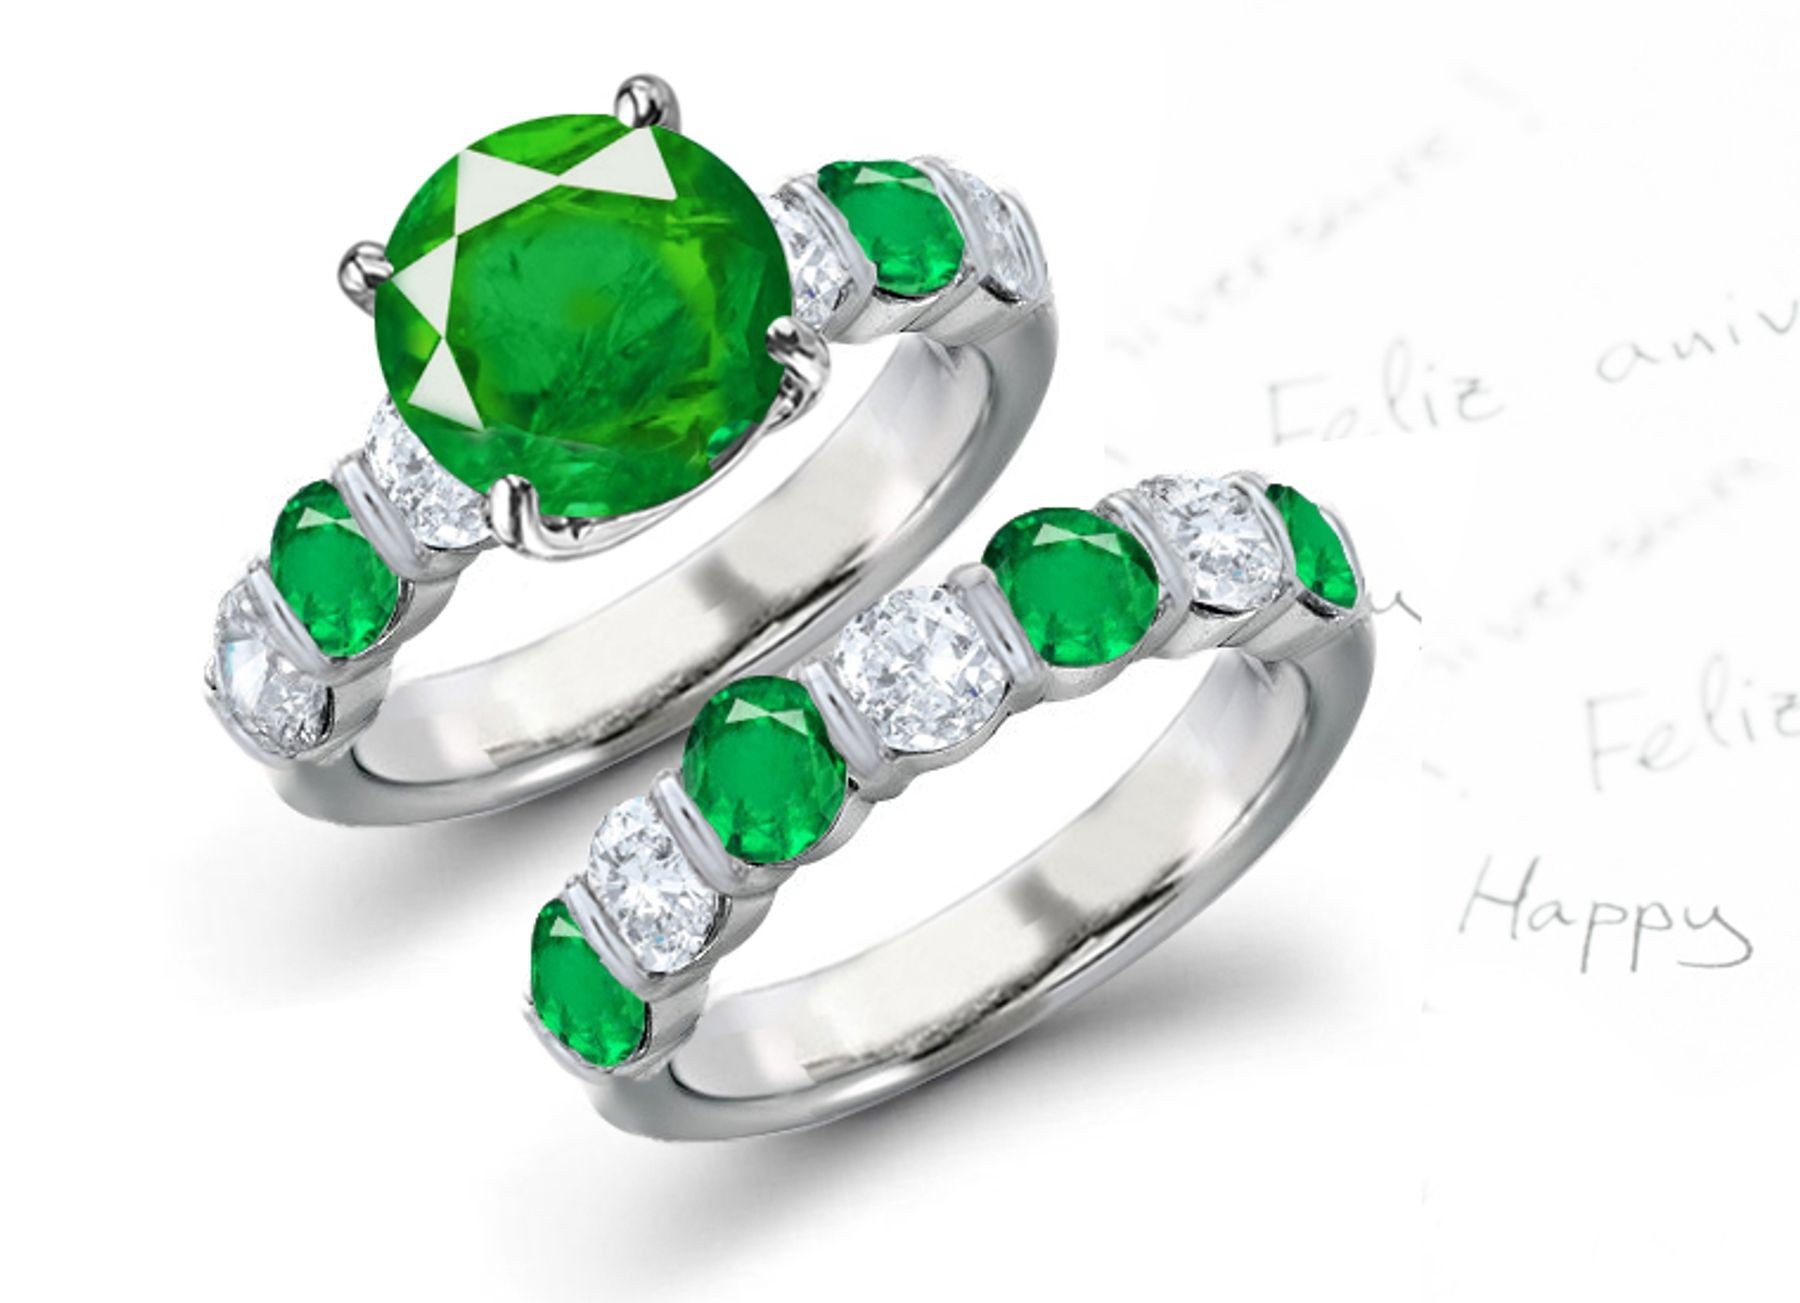 Special Annoucements:  This Especially Recommended 7 Stone Cocktail Ring with 7 Emeralds and Diamonds & 7 Stone Wedding Diamond Band in Gold